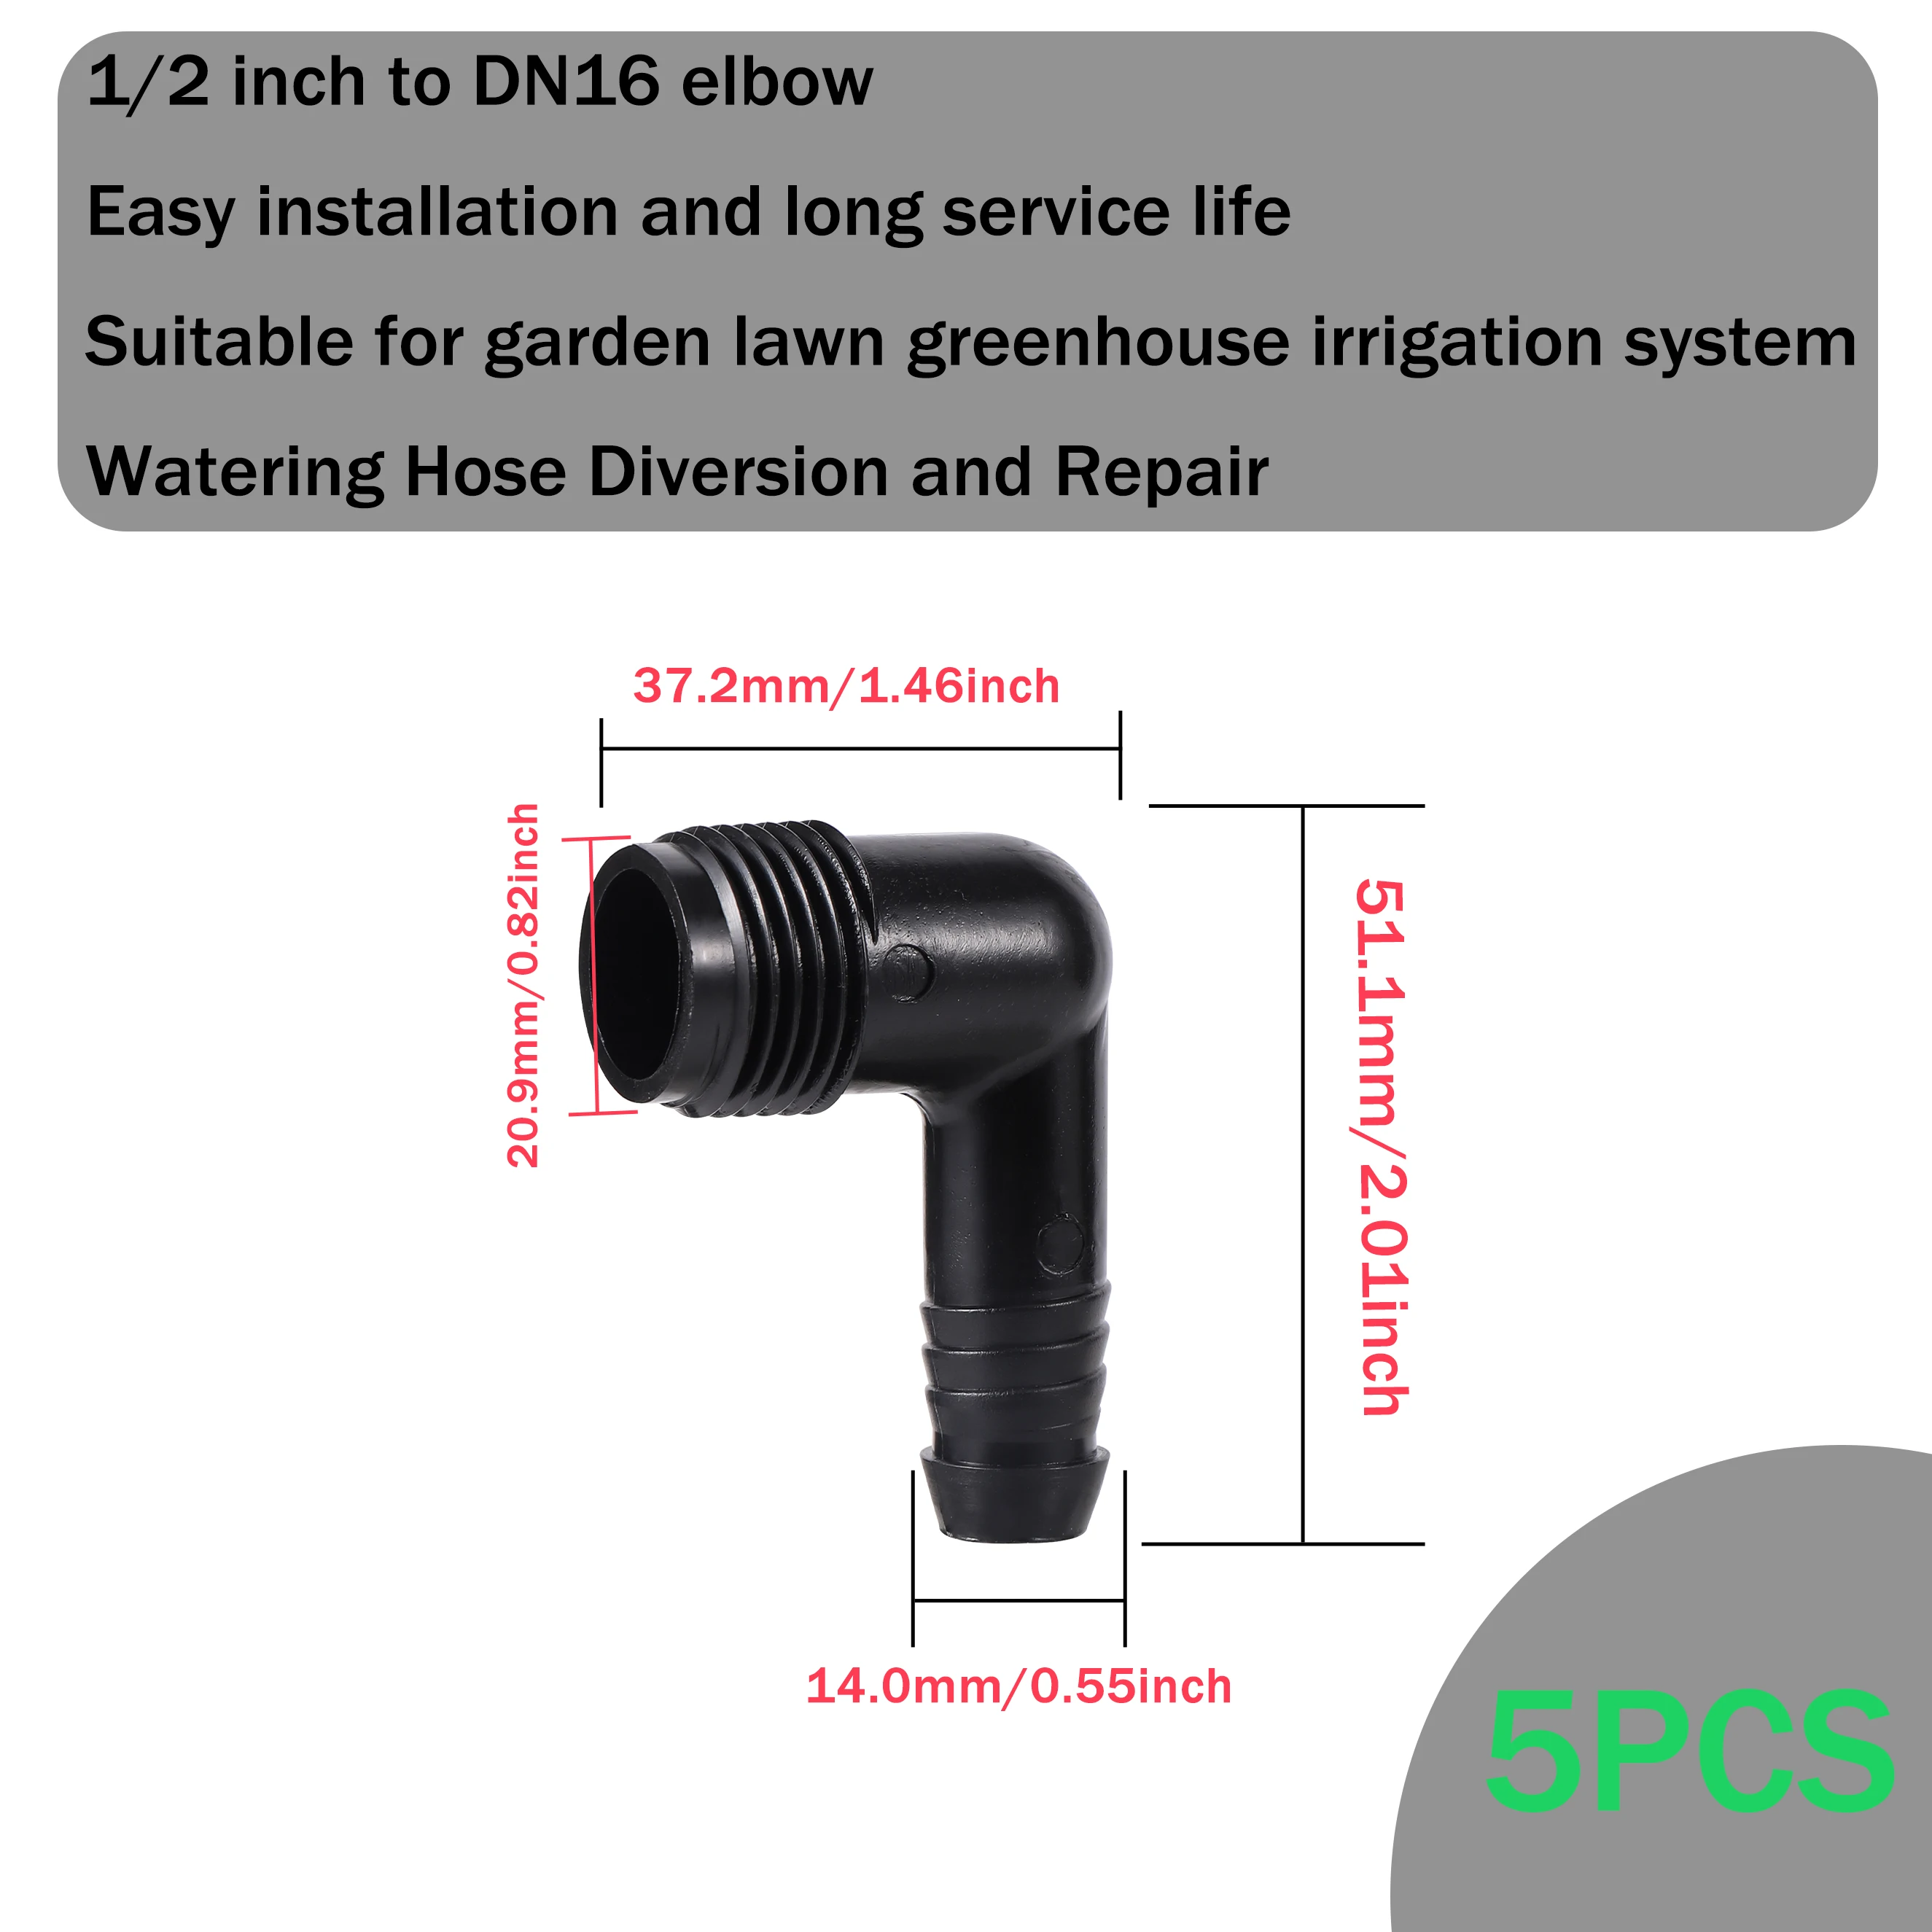 Dn16 Drip Barb Tee Connector Straight Through Elbow Garden Water Drip Irrigation Pipe Fittings Water Pipe Adapter Coupler 5pcs images - 6